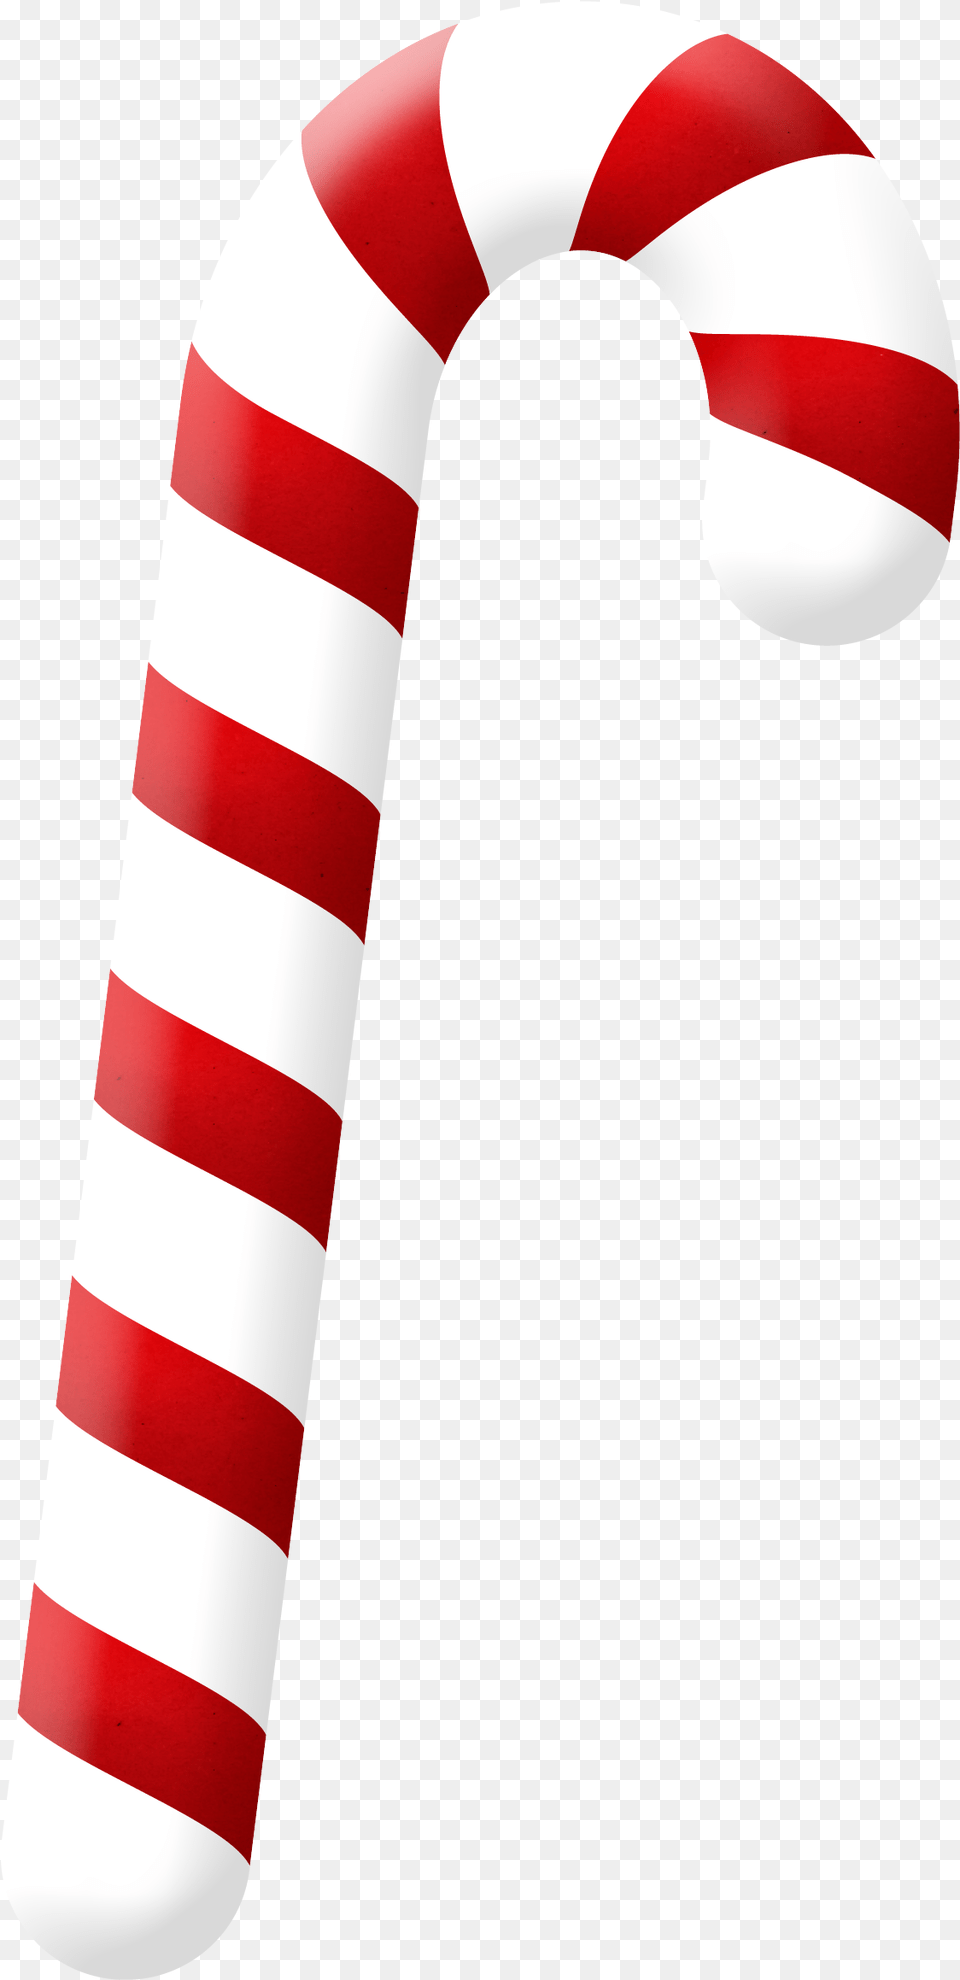 Library Of Christmas Candy Cane Black And White Files Cartoon Candy Cane, Stick, Food, Sweets Free Transparent Png